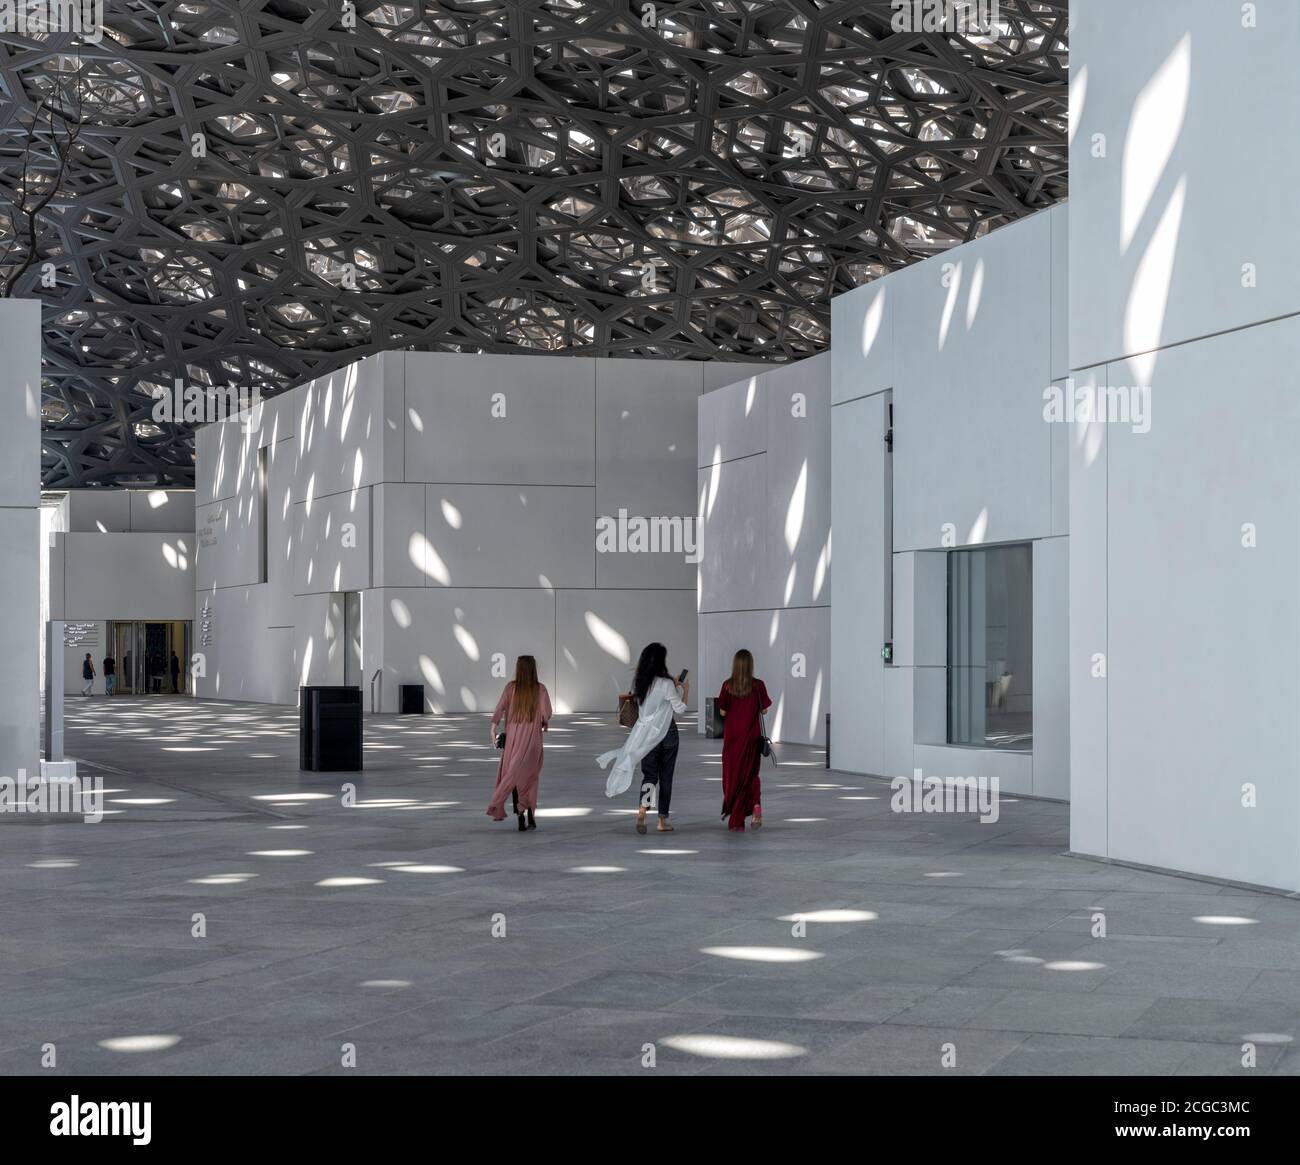 An interior shot of the Louvre Abu Dhabi which includes visitors, its overhead hi-tech roof with filtering light, and white facade walls of its various exhibiting spaces. Opened Novemeber 2017. Stock Photo